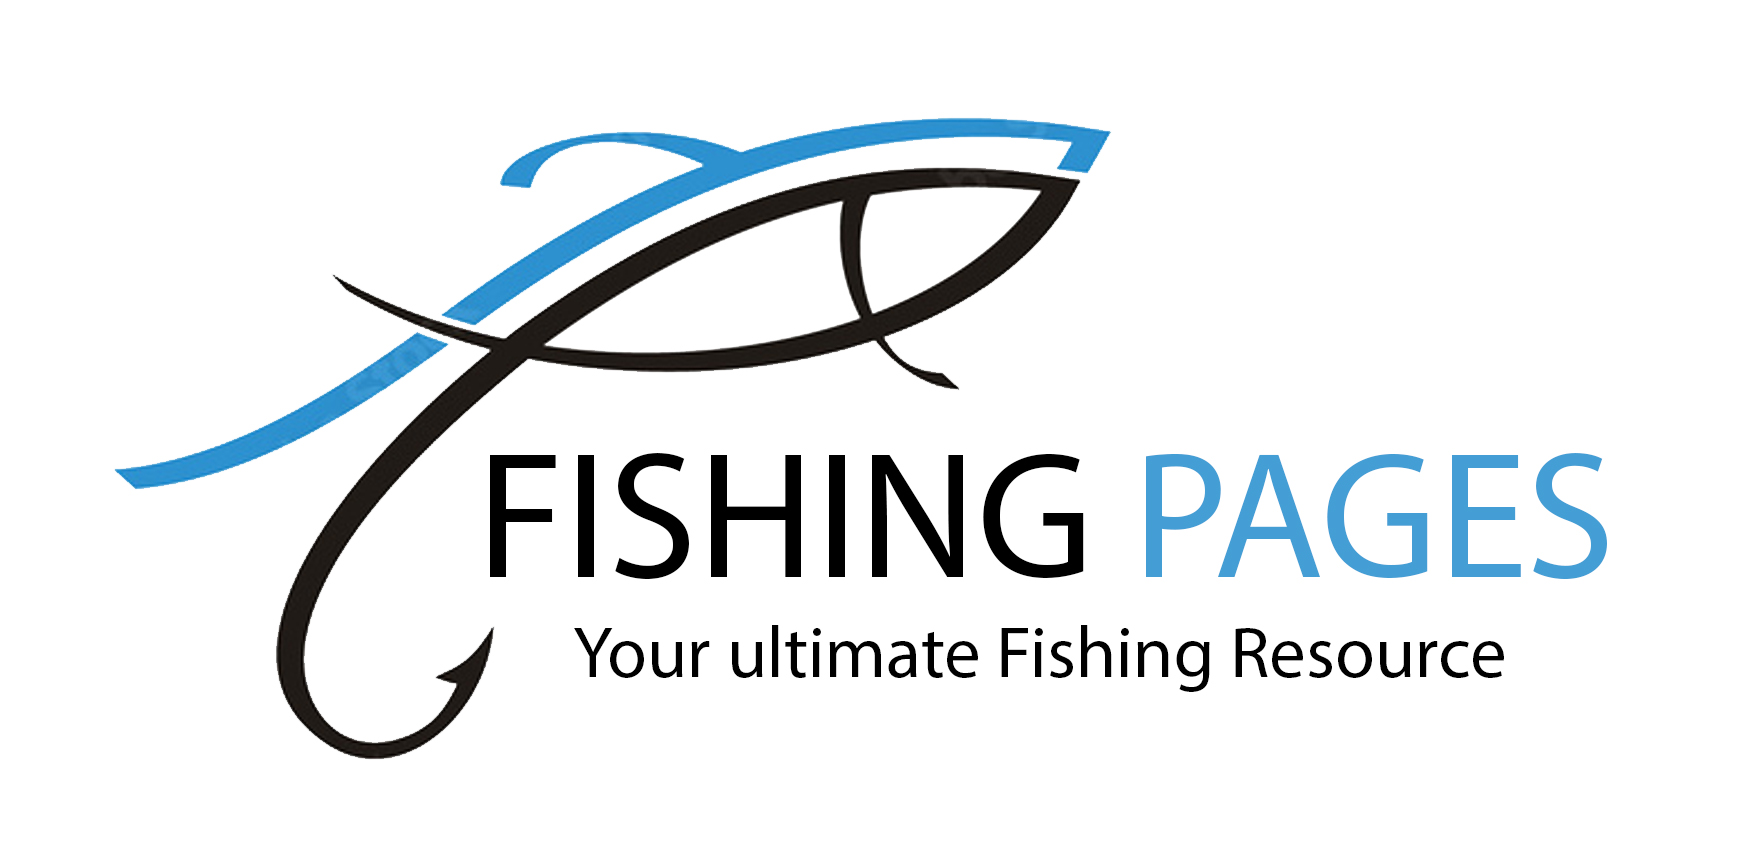 FishingPages Upcoming Events